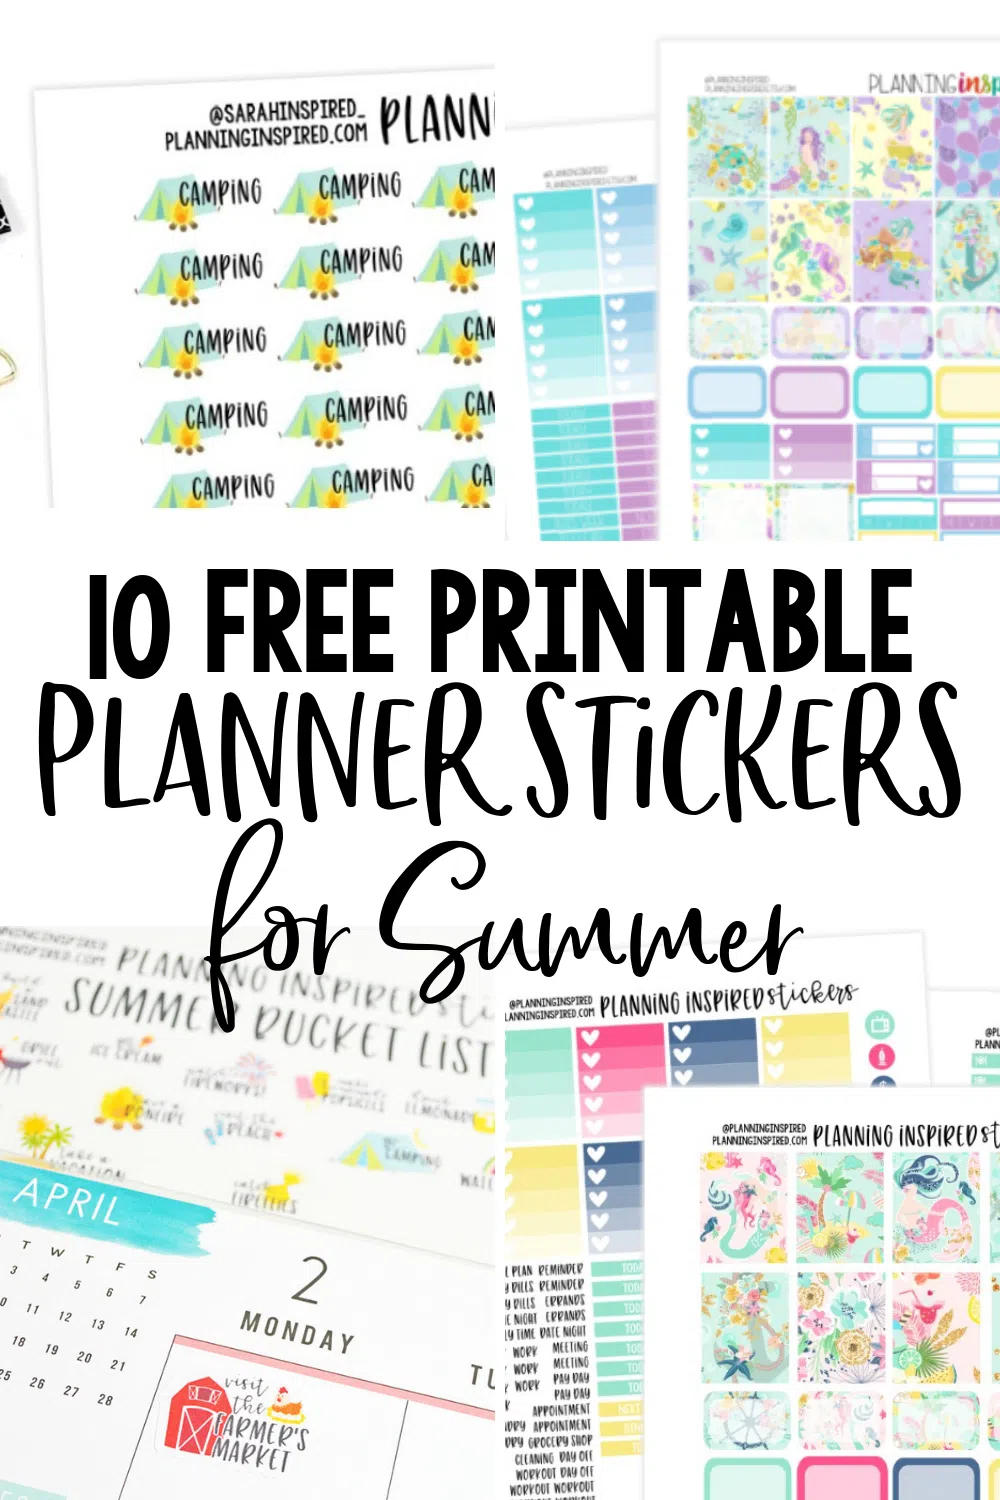 10 Free Printable Planner Stickers for Summer